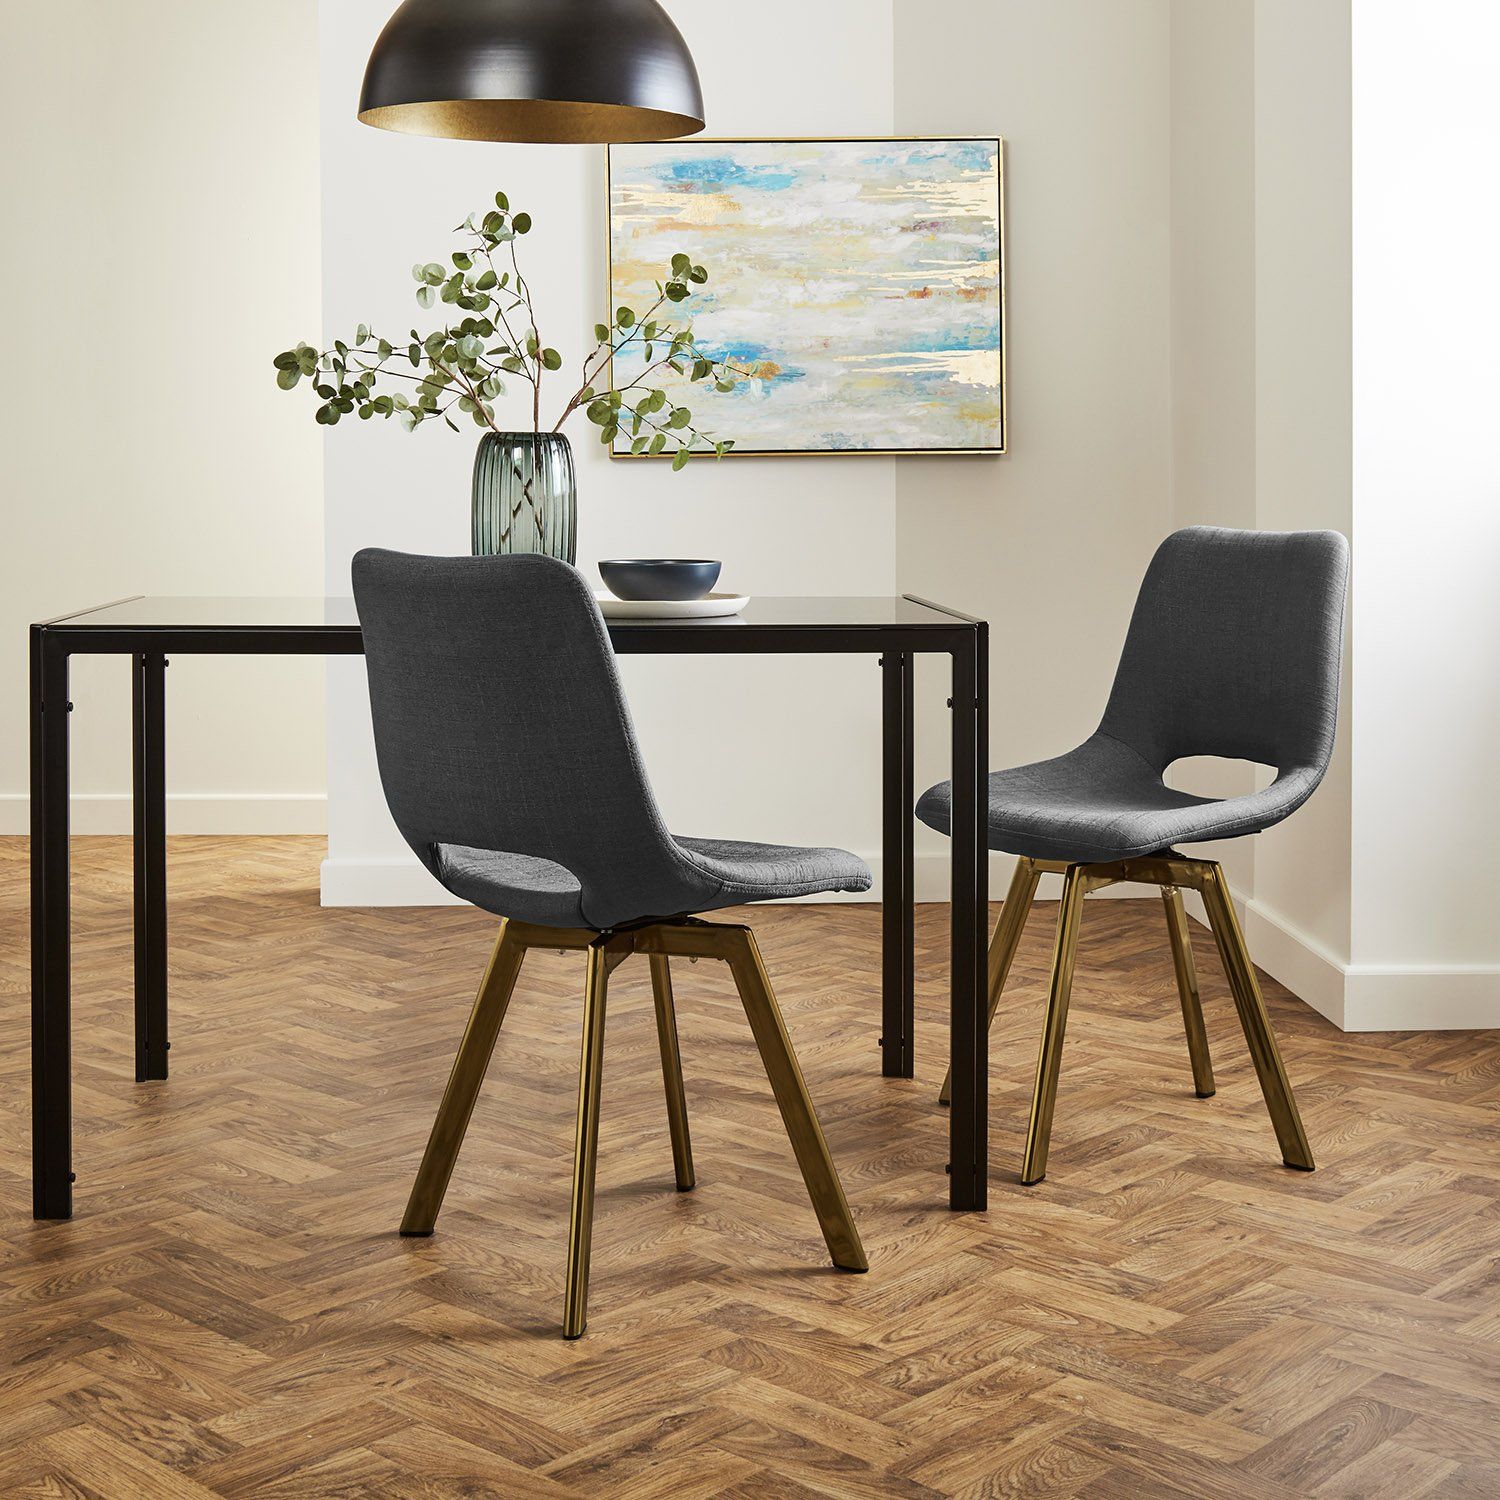 Margot dining chairs x2 - grey and brass- Laura James